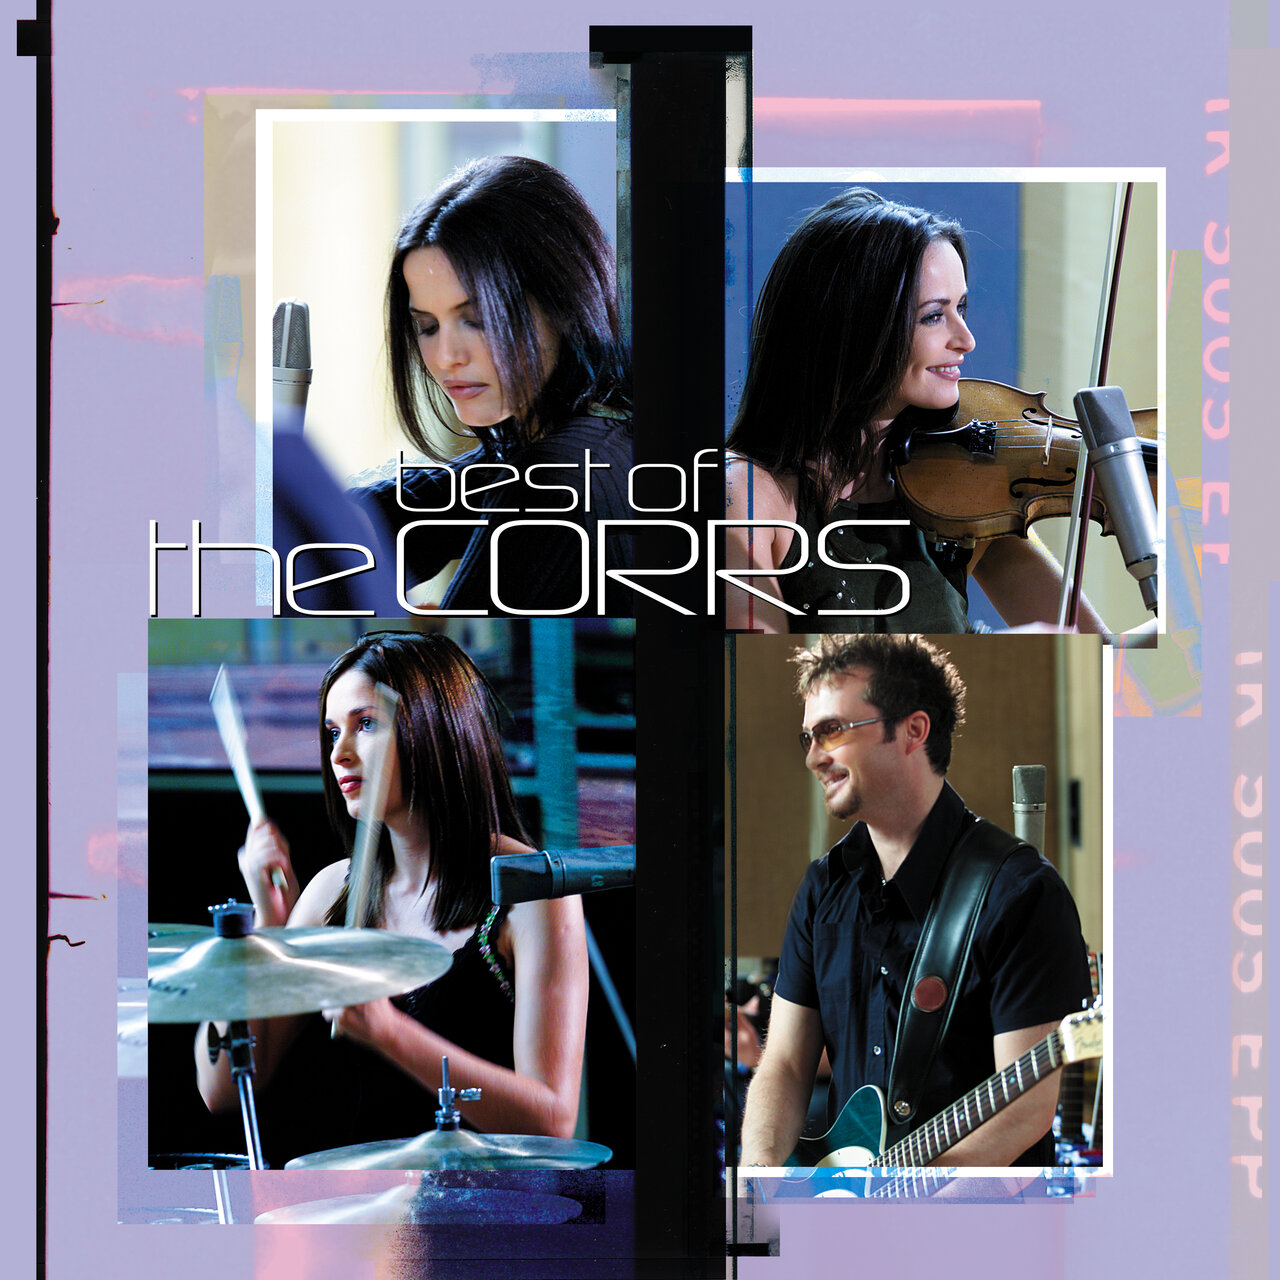 The Corrs - Best of The Corrs (2023) [24Bit-44.1kHz] FLAC [PMEDIA] ⭐️ Download